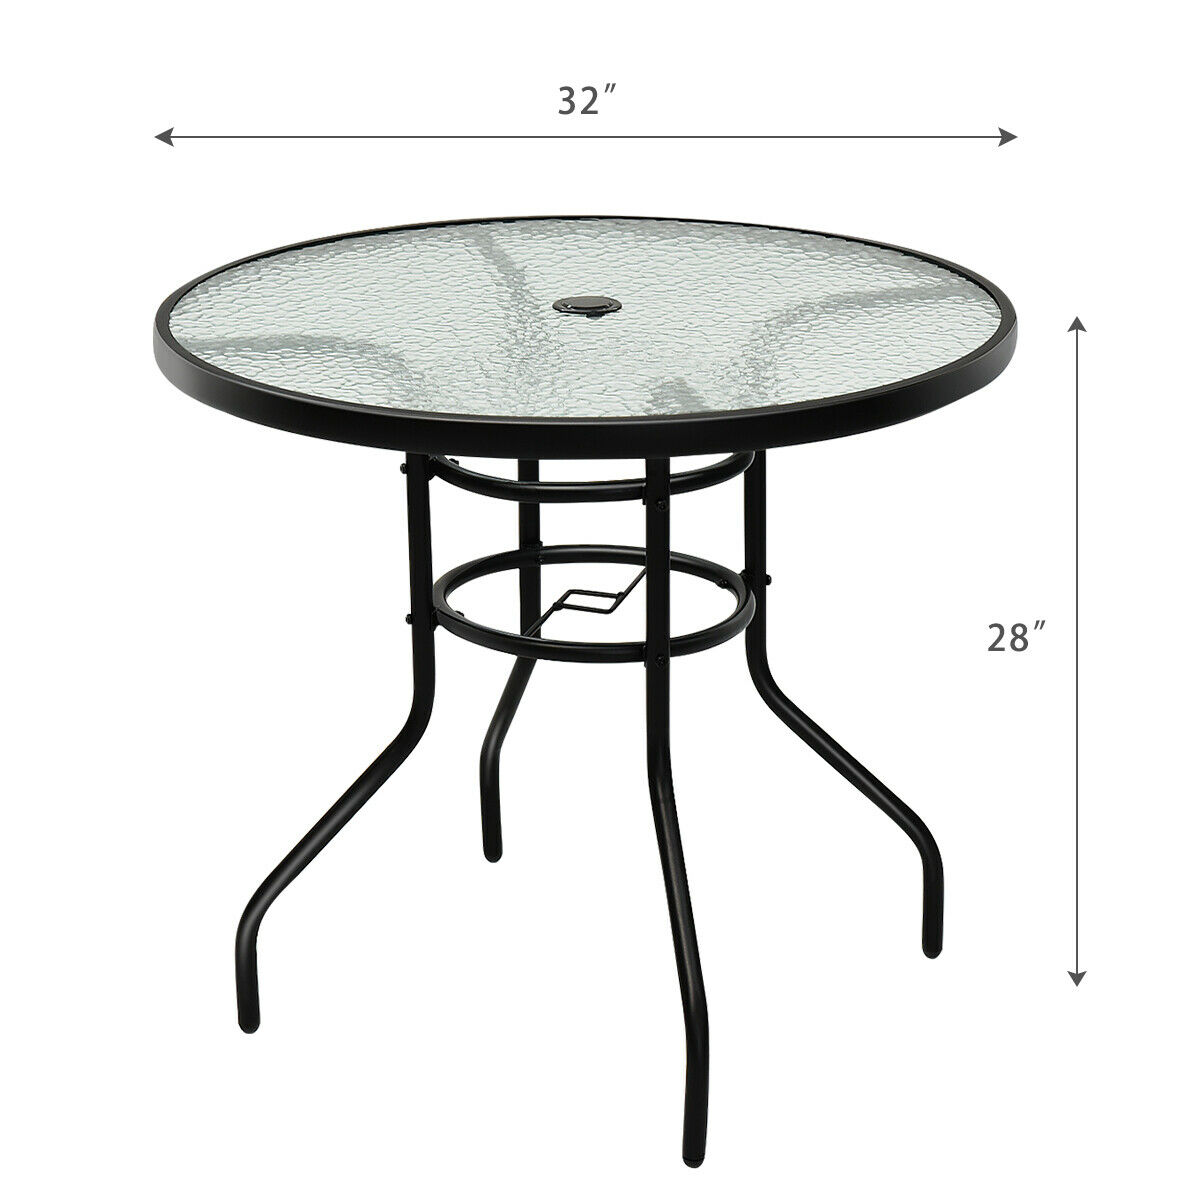 Costway 32'' Patio Round Table Tempered Glass Steel Frame Outdoor Pool Yard Garden - image 4 of 8